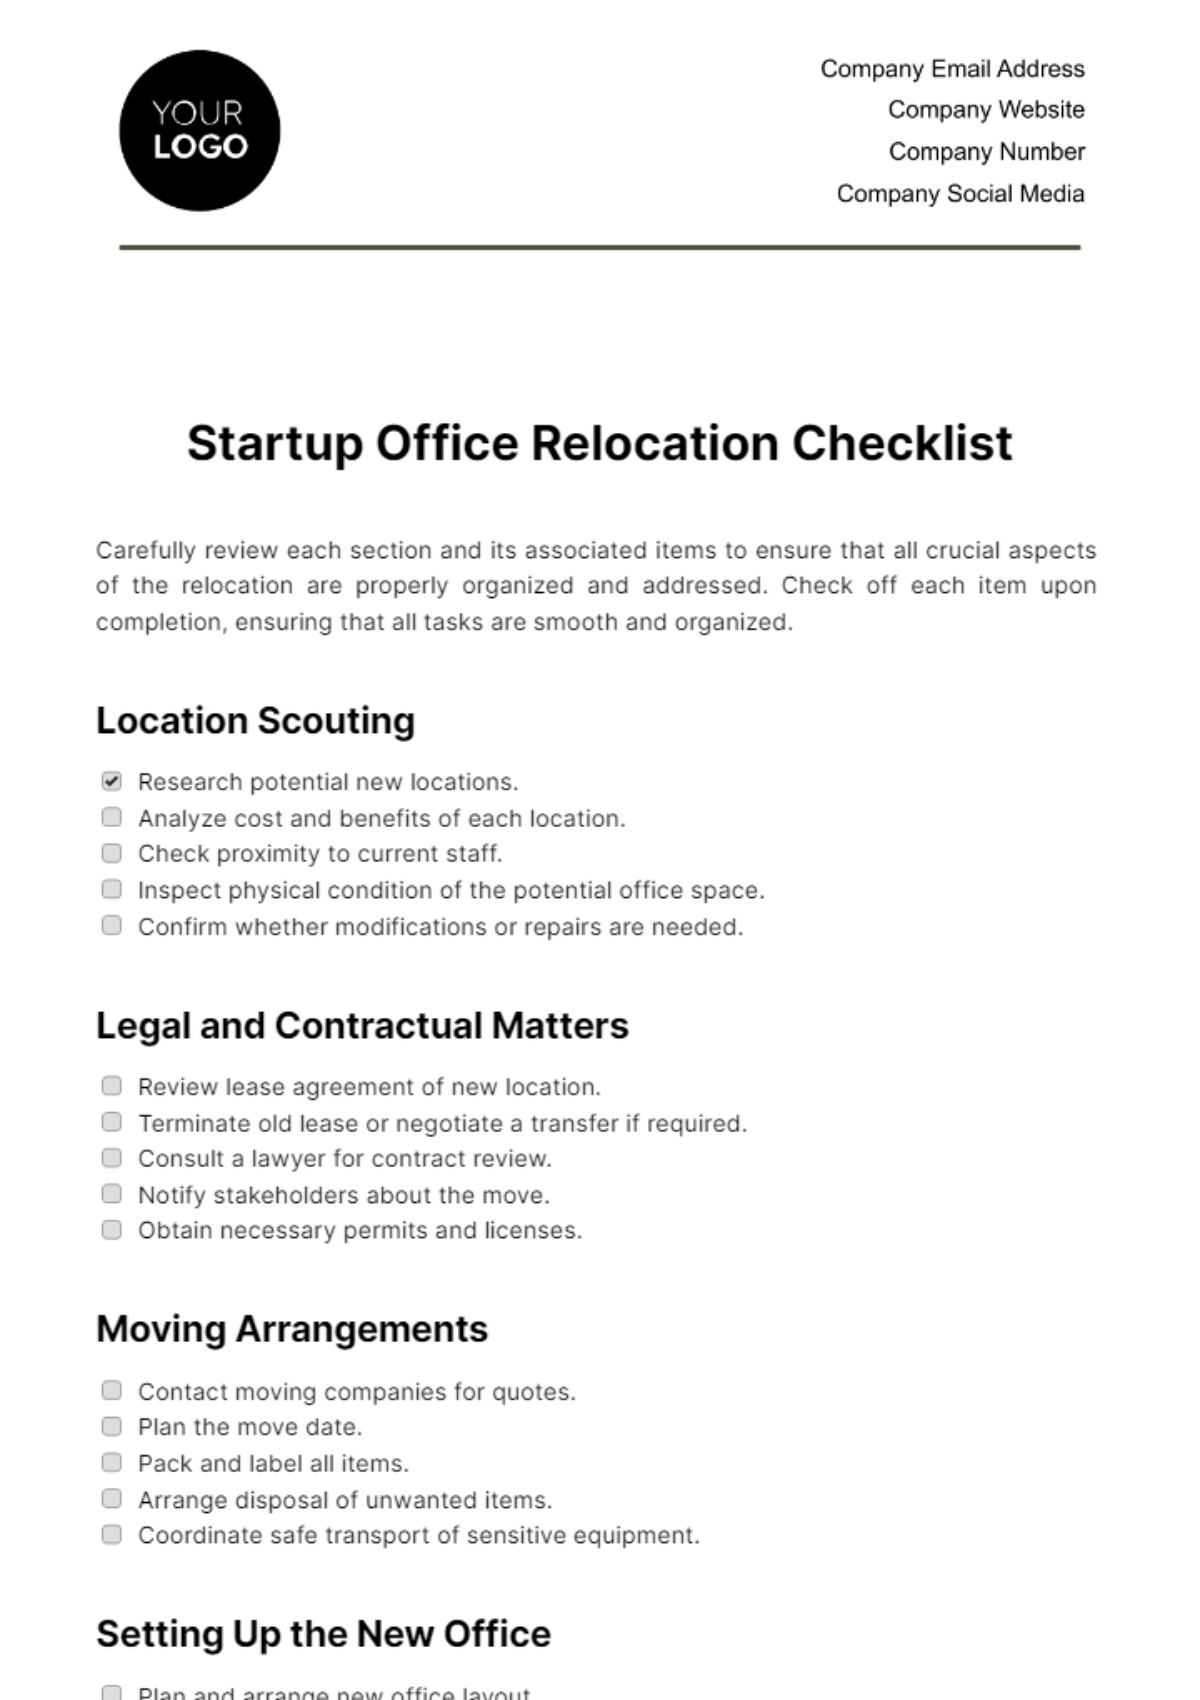 Free Startup Office Relocation Checklist Template